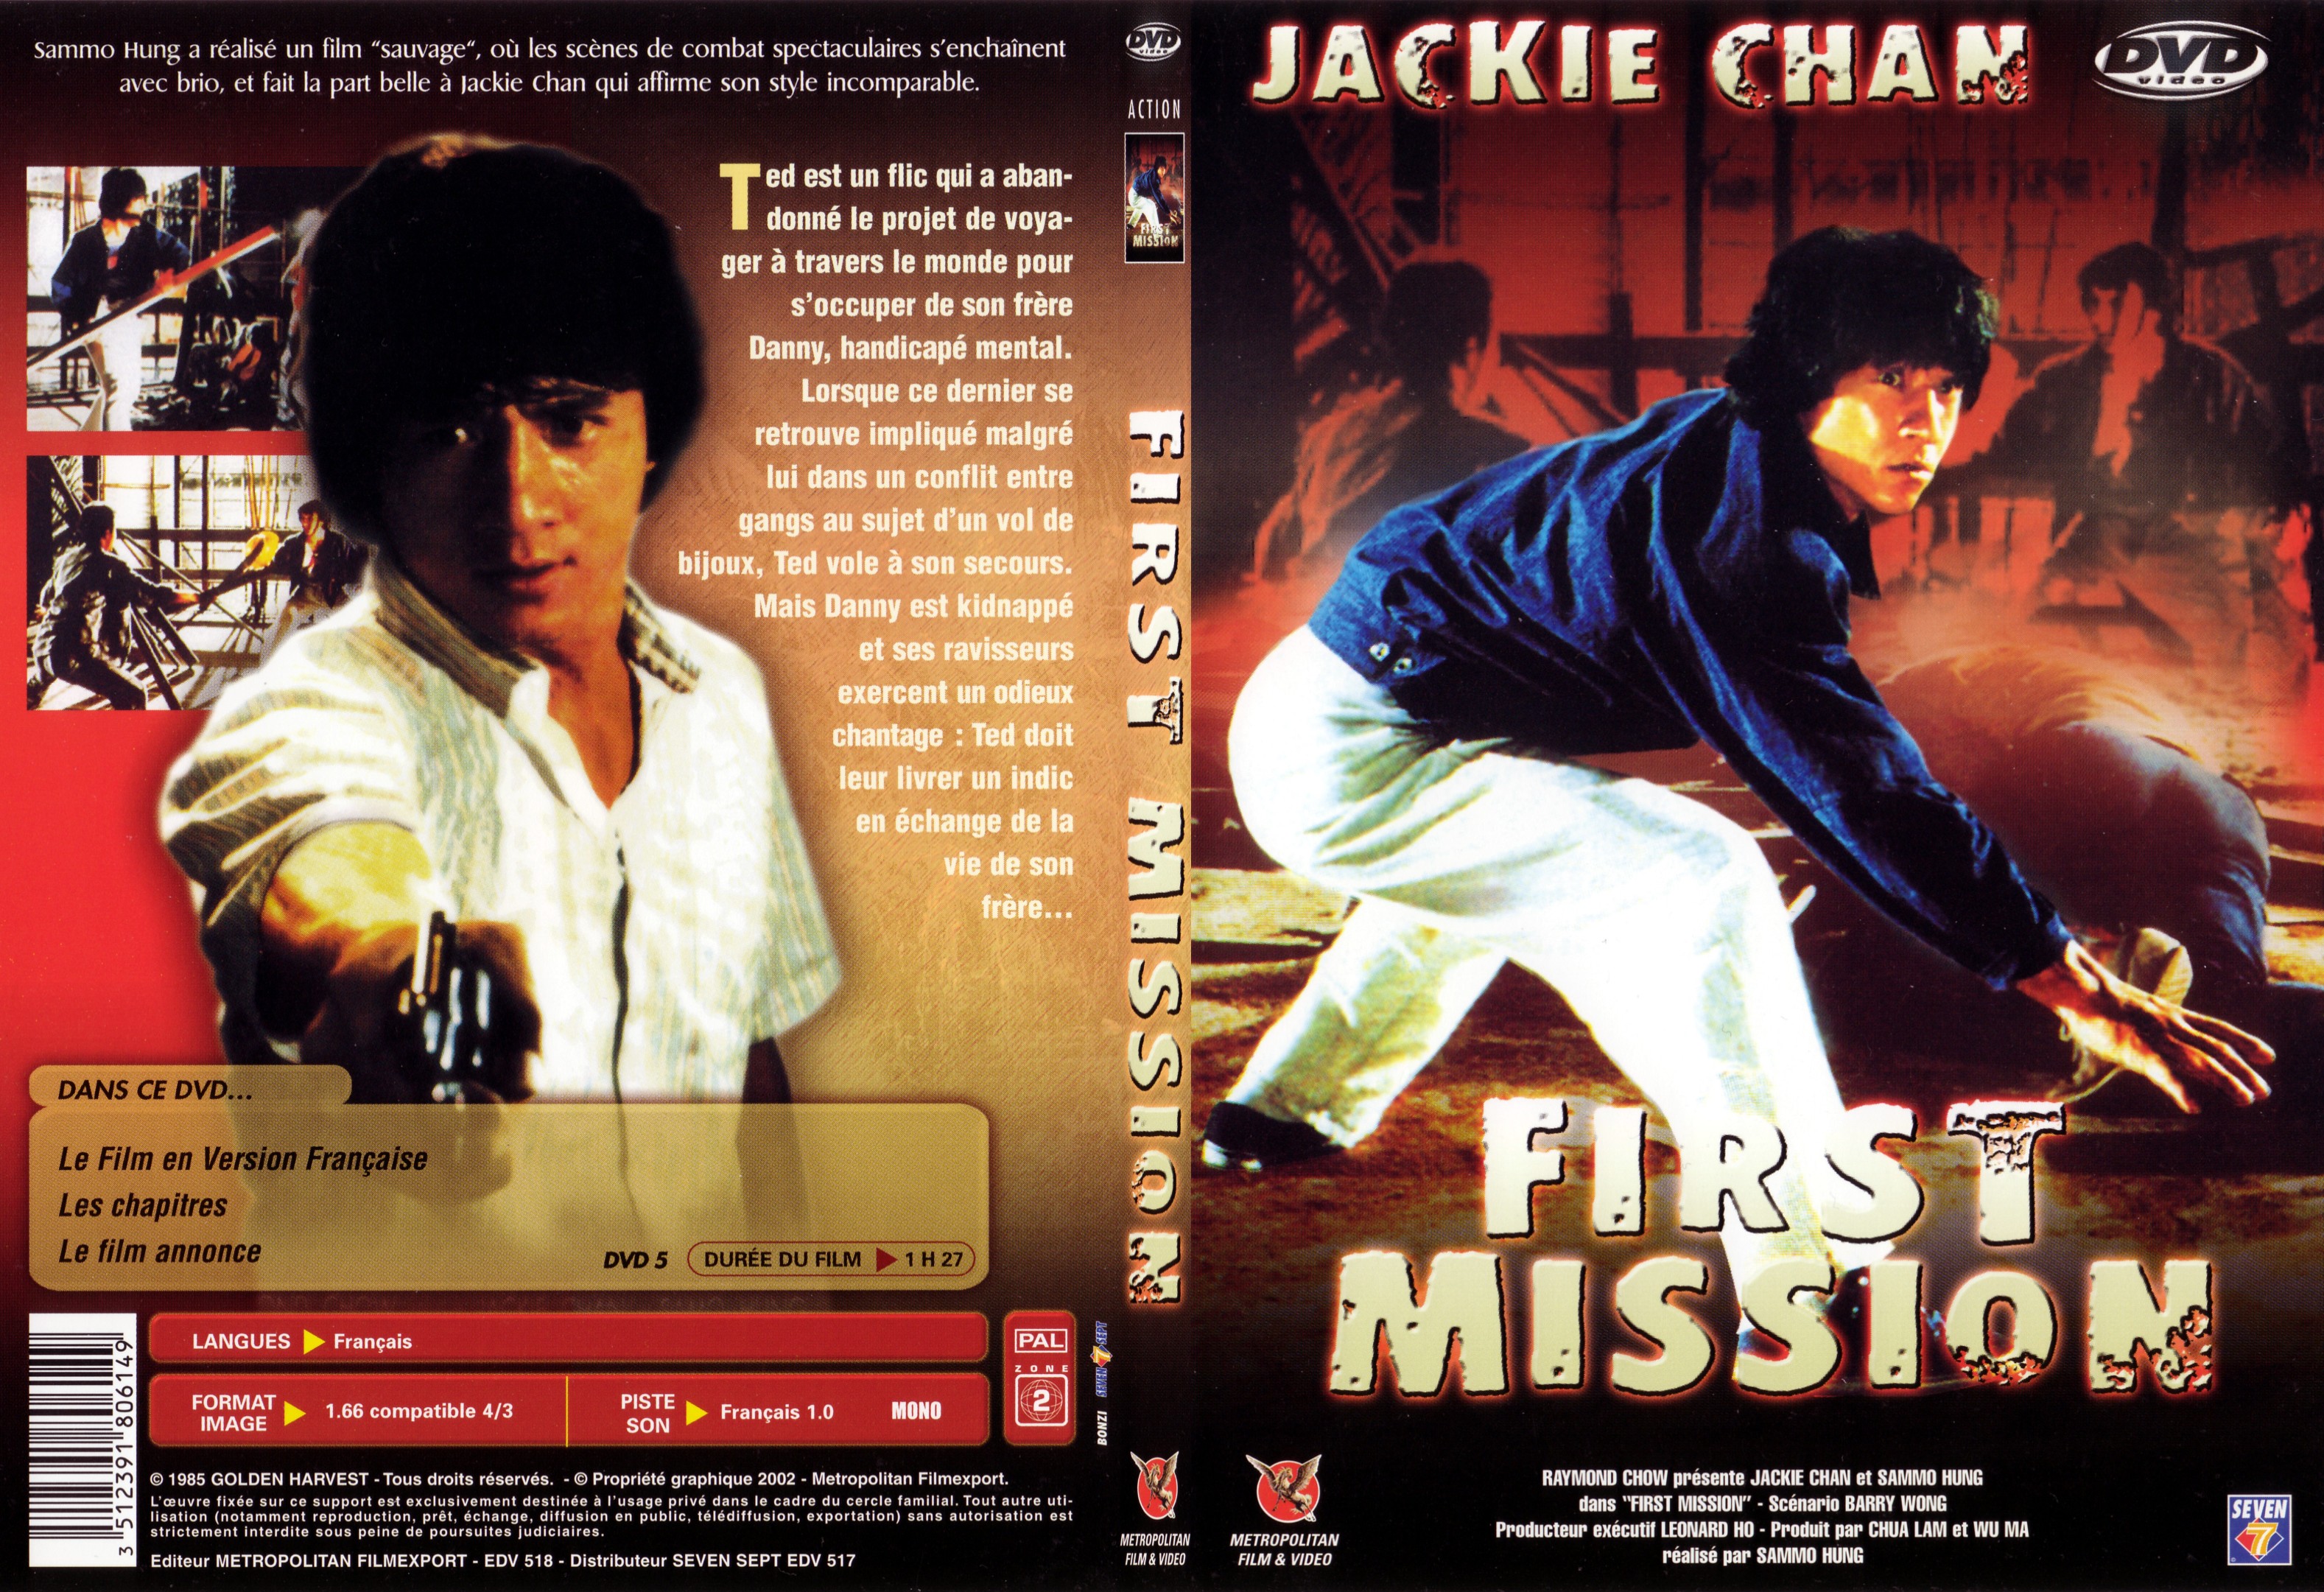 Jaquette DVD First mission - SLIM